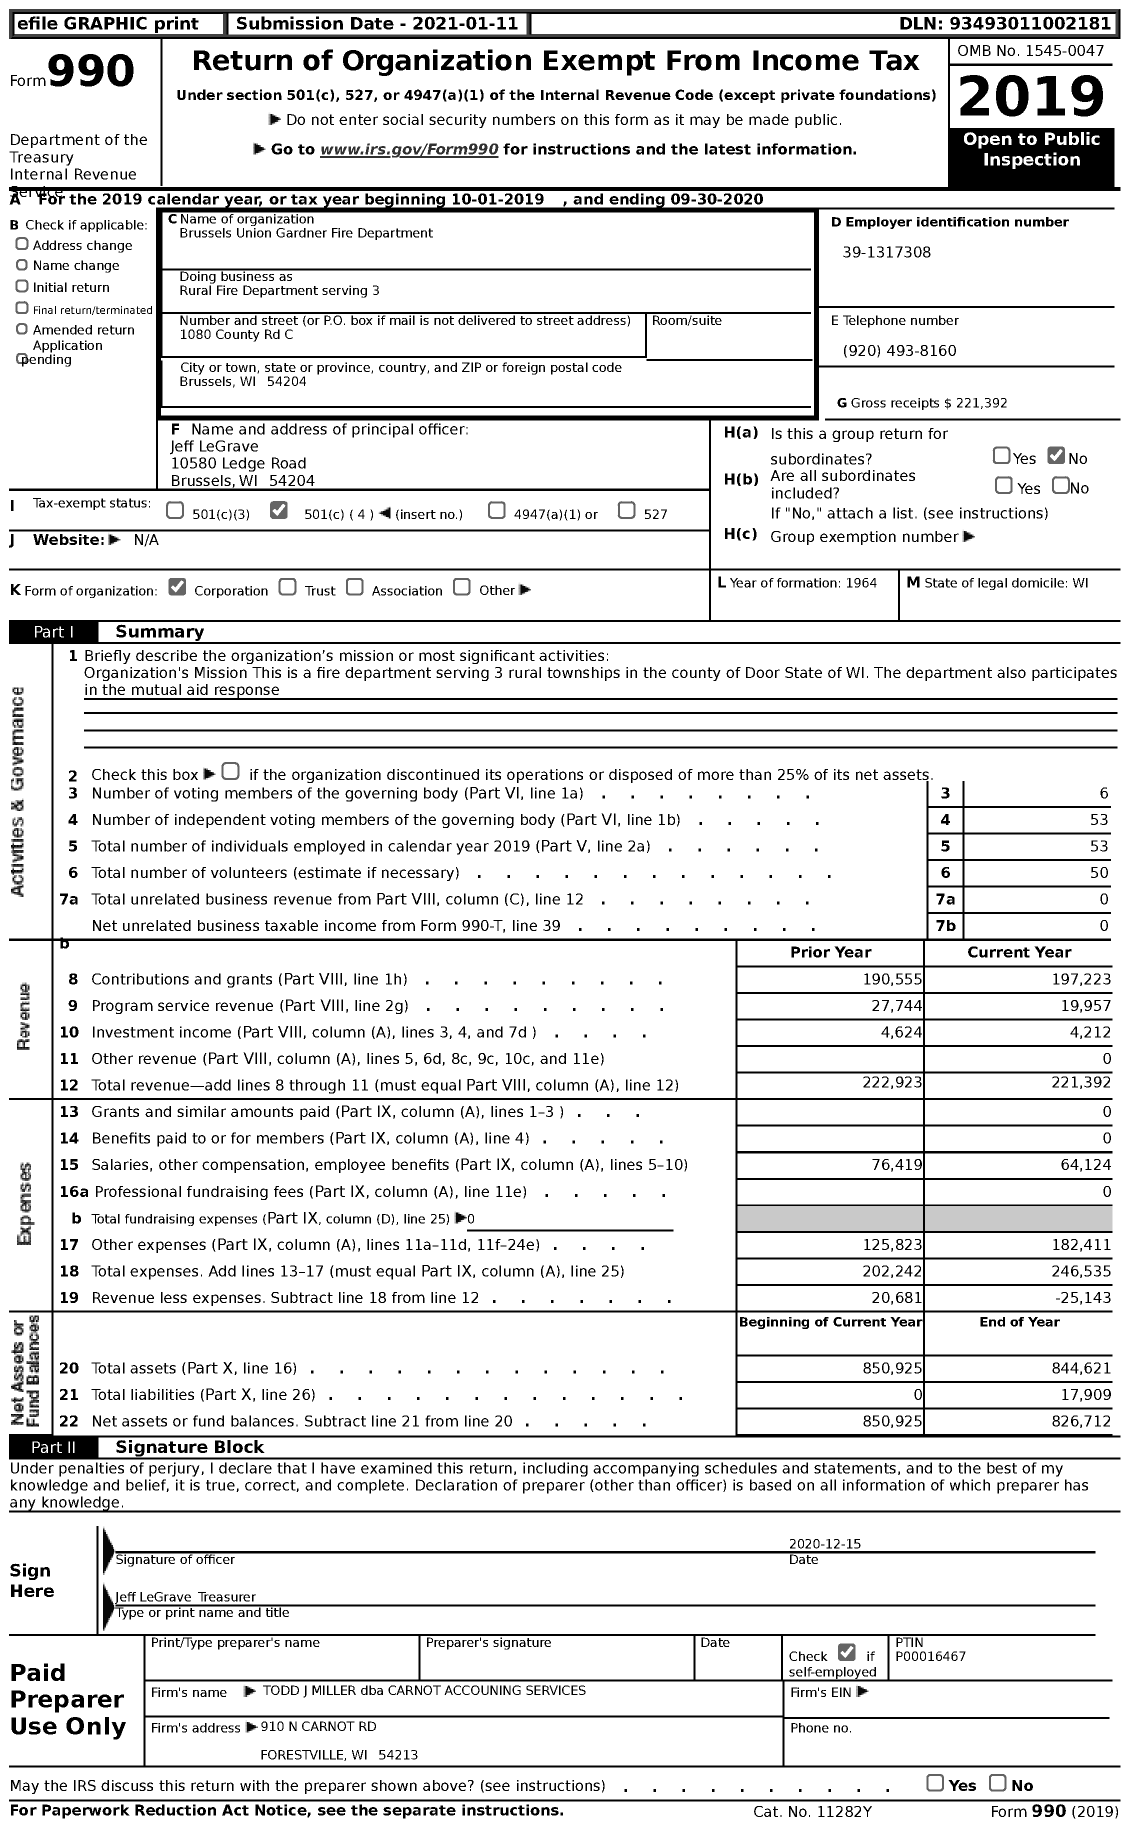 Image of first page of 2019 Form 990 for Rural Fire Department serving 3